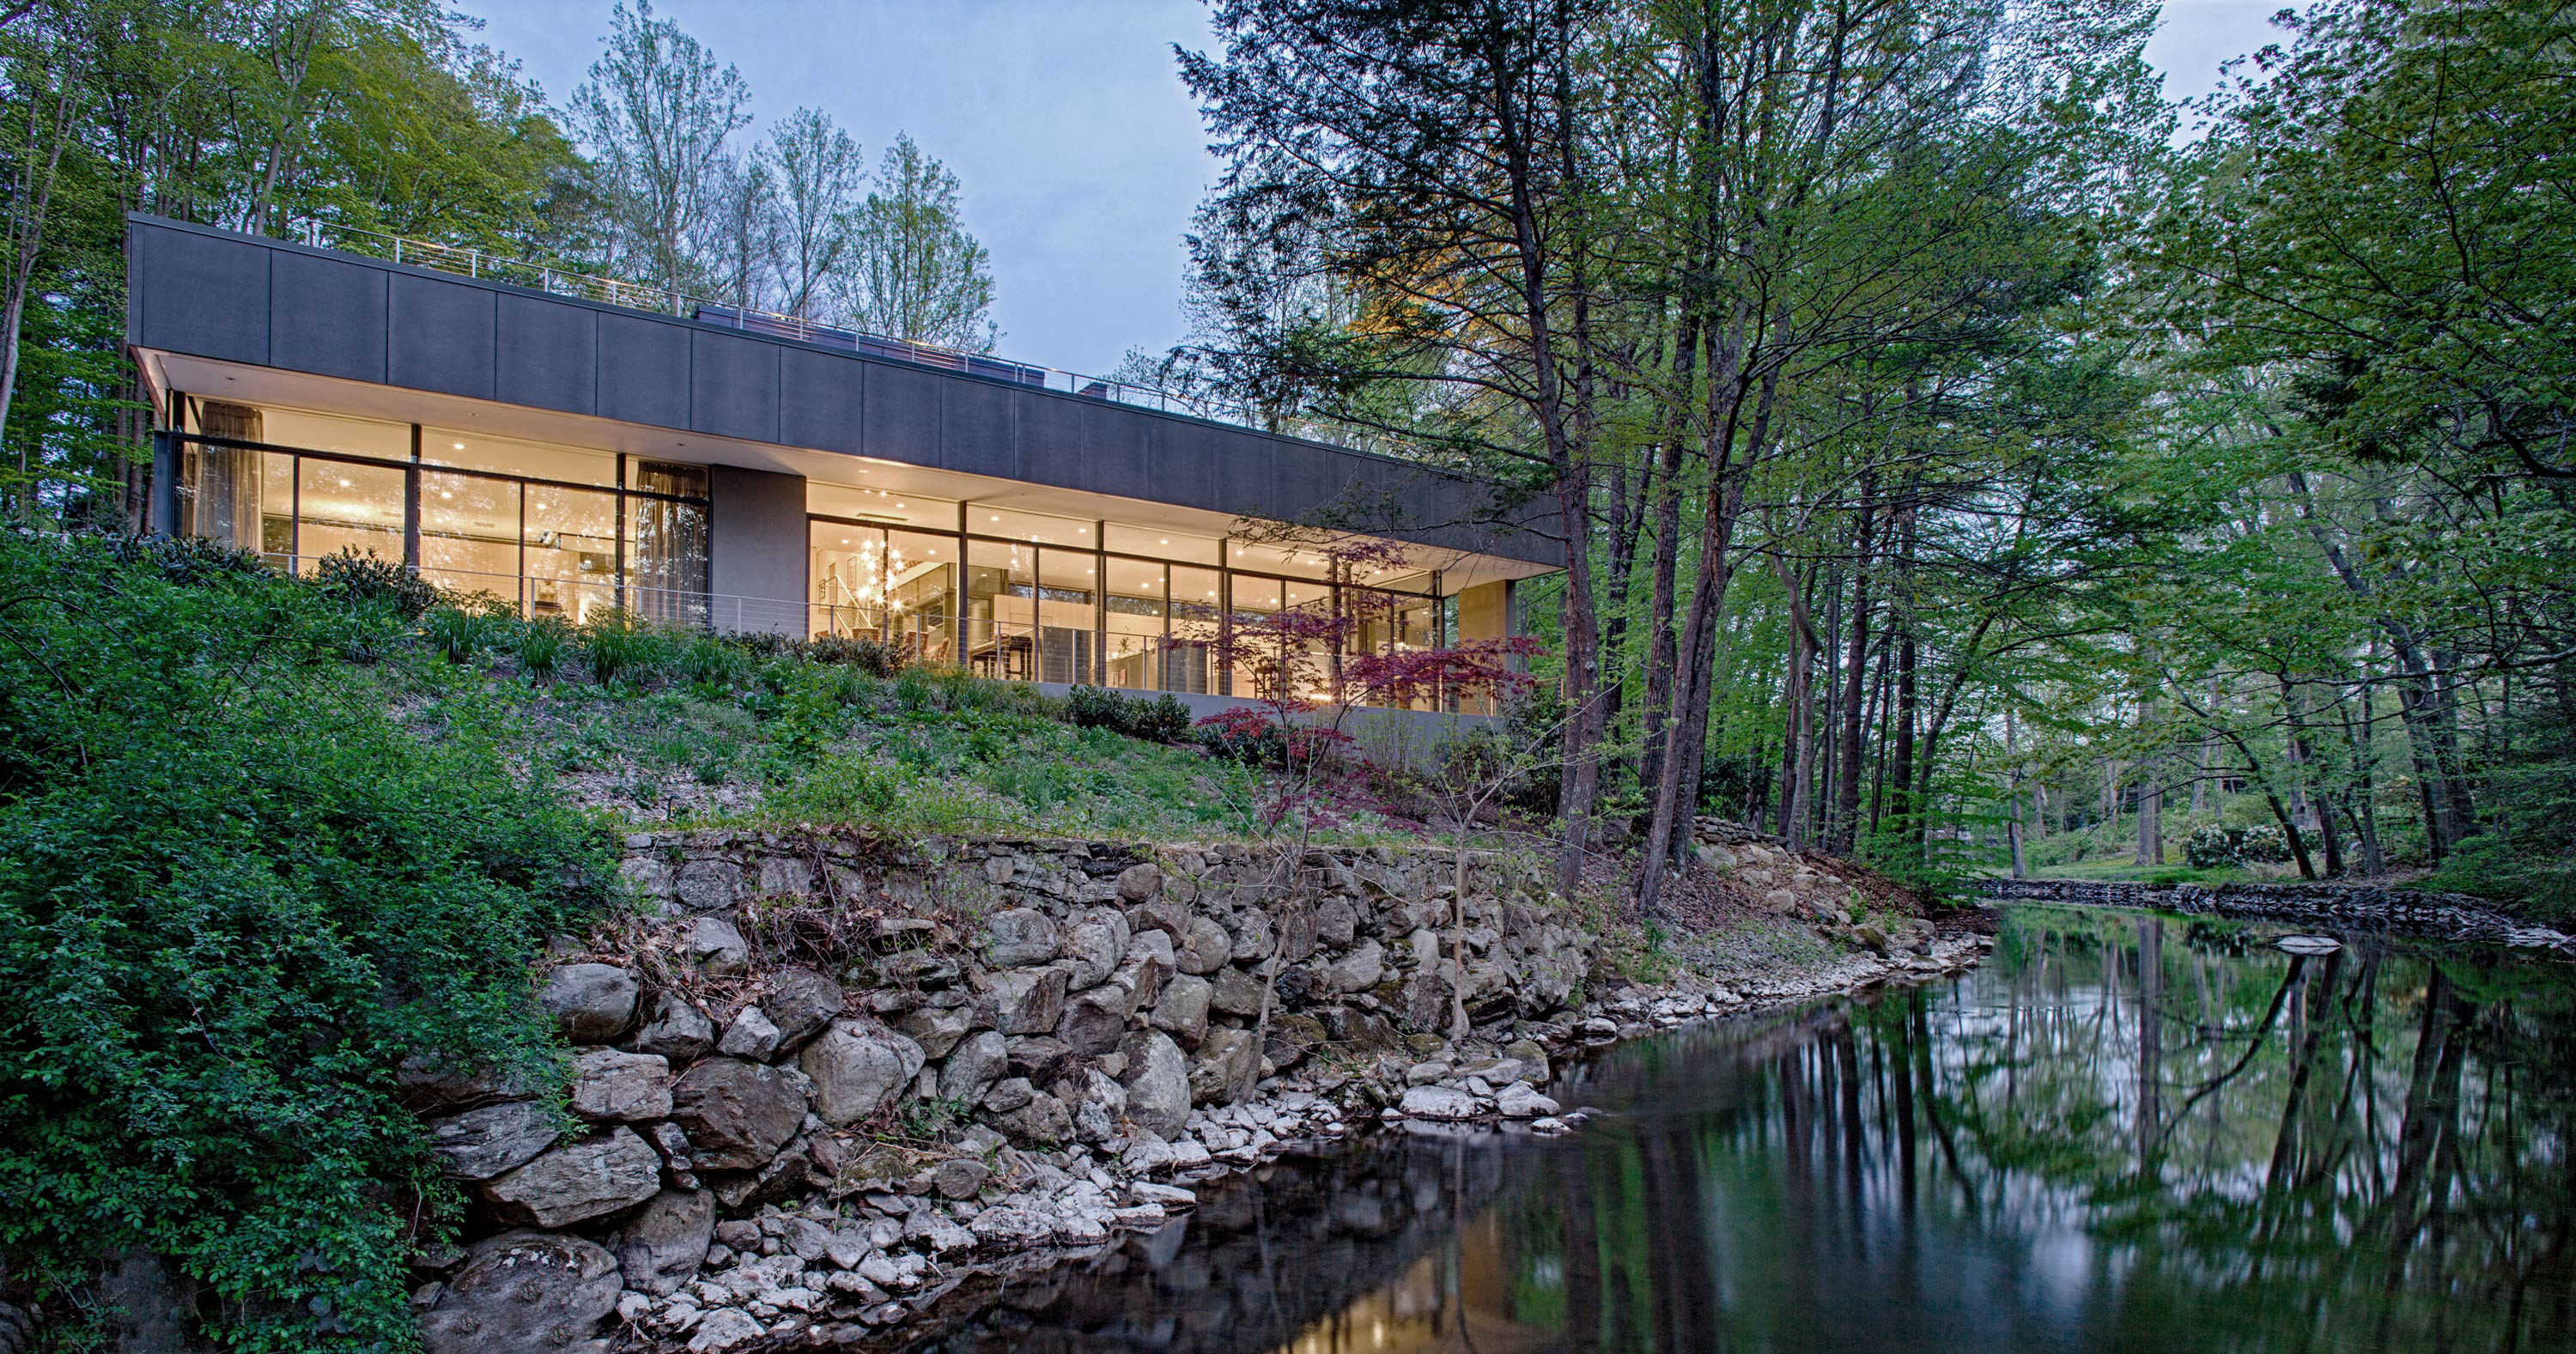 Exterior photo of Weston Residence by Specht Novak Architects. Shot by Jasper Lazor, featuring the concrete and glass home with roof gardens, and organic relation to its surrounding creek.